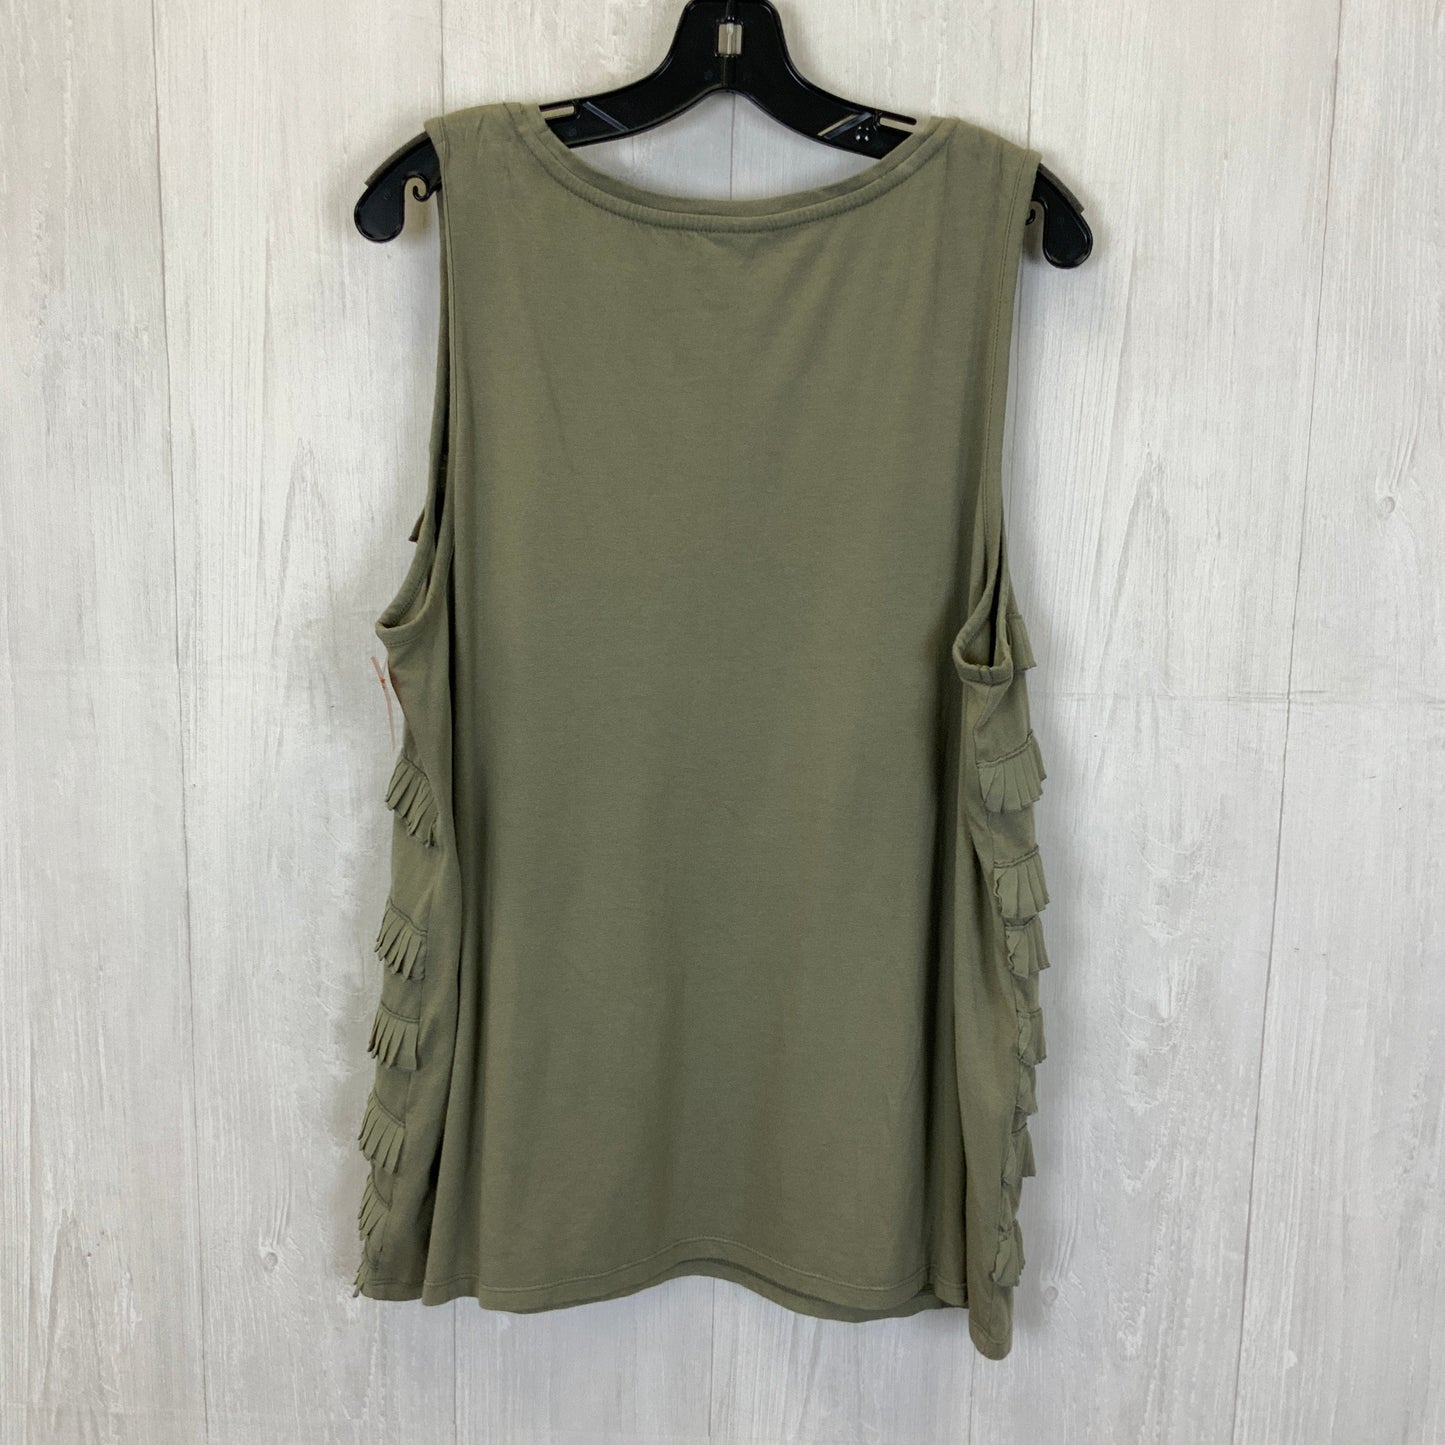 Green Tank Top Chicos, Size 3x